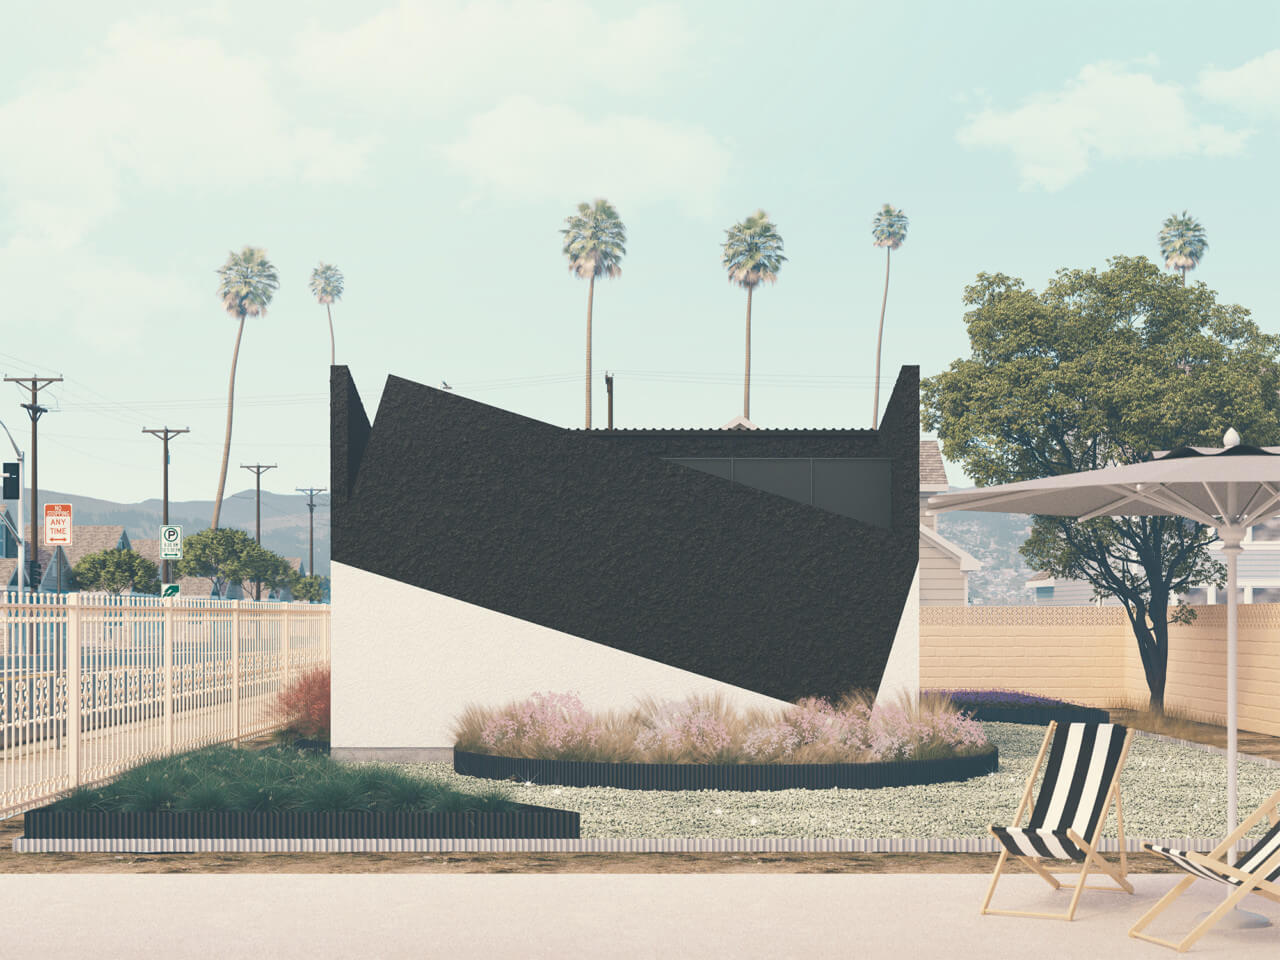 rendering depicting the rear facade of an unbuilt accessory dwelling unit in los angeles with palm trees in the background